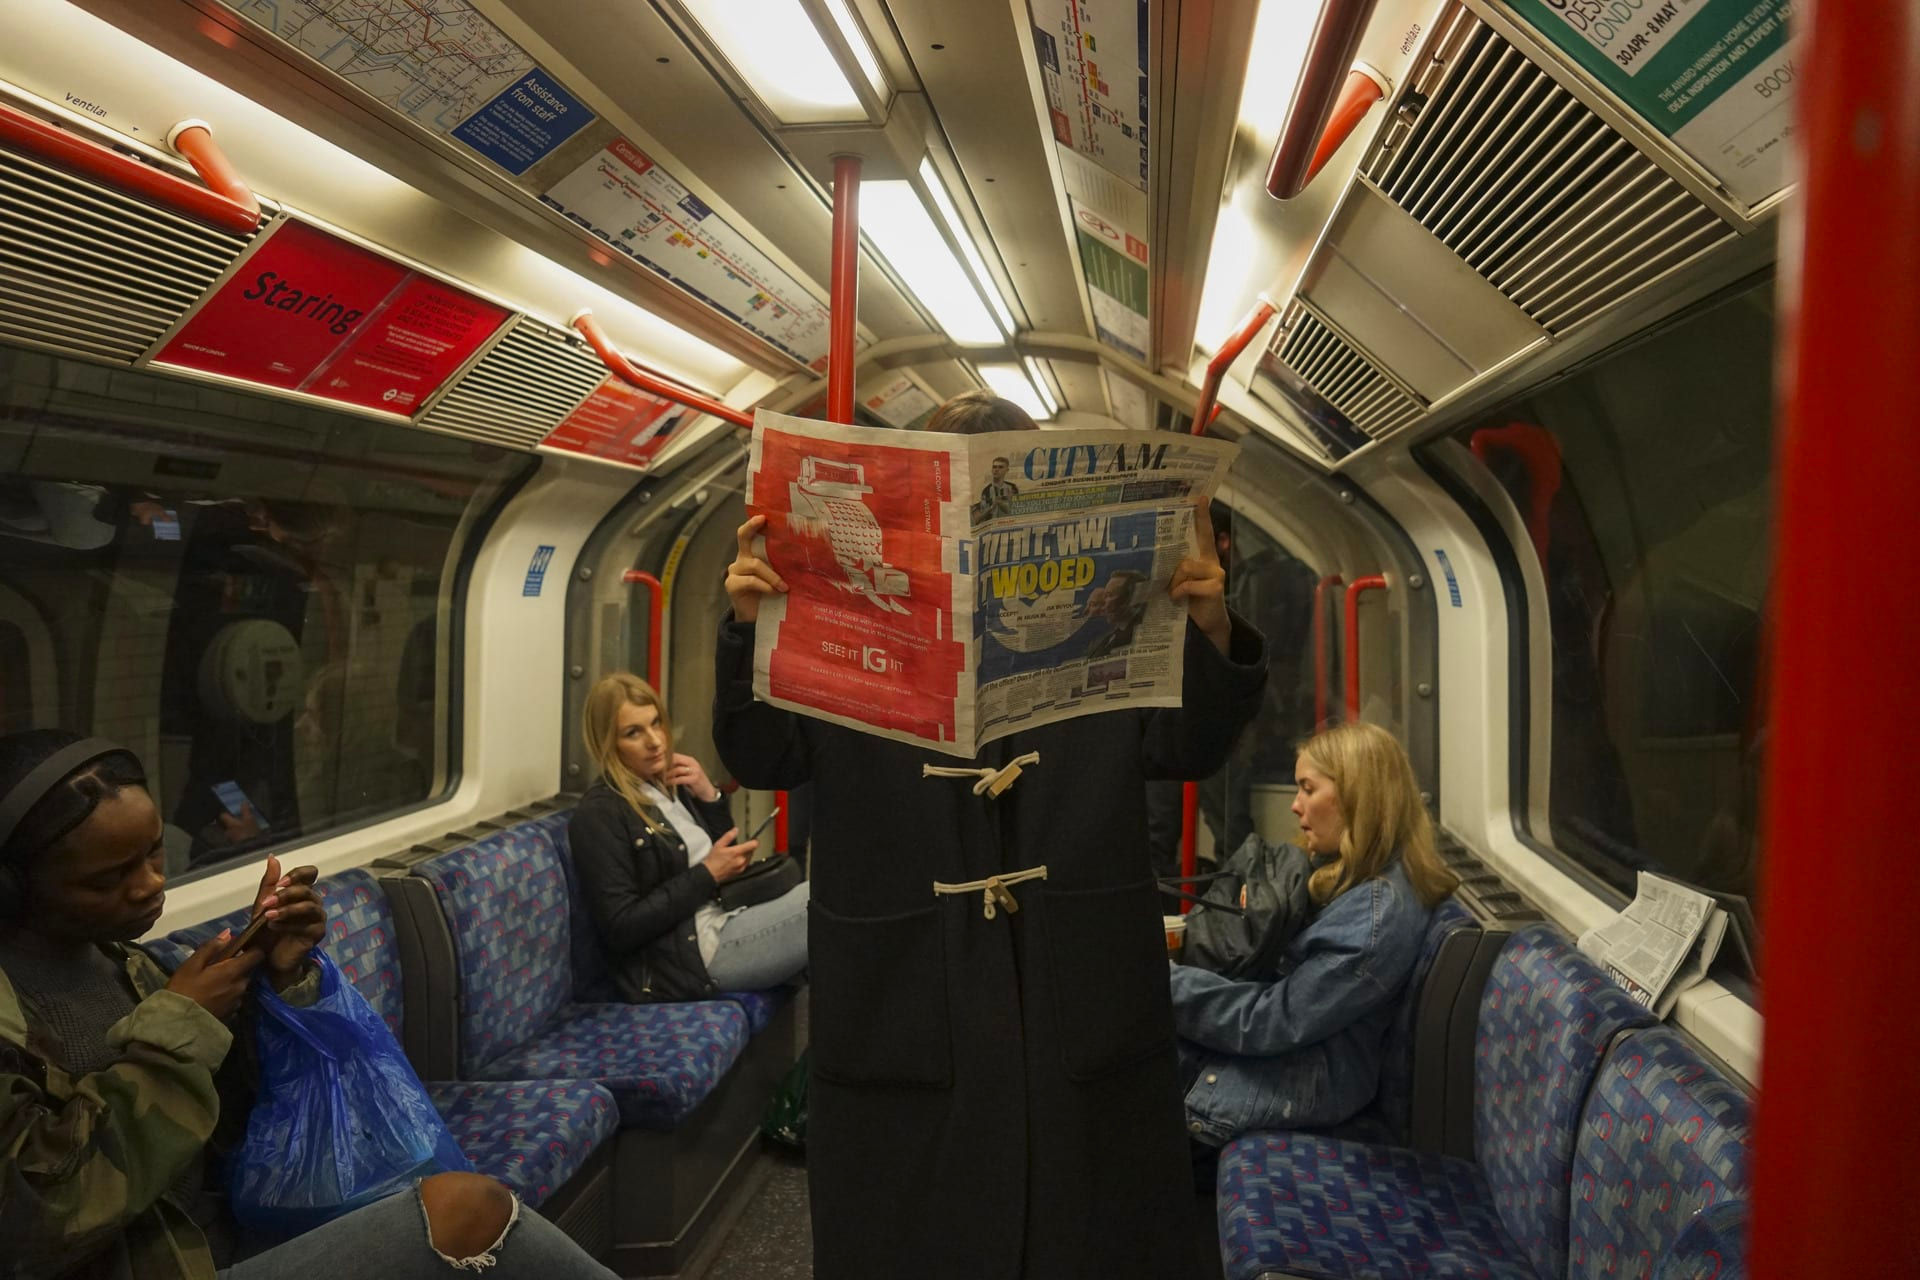 Photograph of a Central Line underground train carriage, with some seated passengers, and a passenger standing, facing the camera, holding an open newspaper, which covers their face.